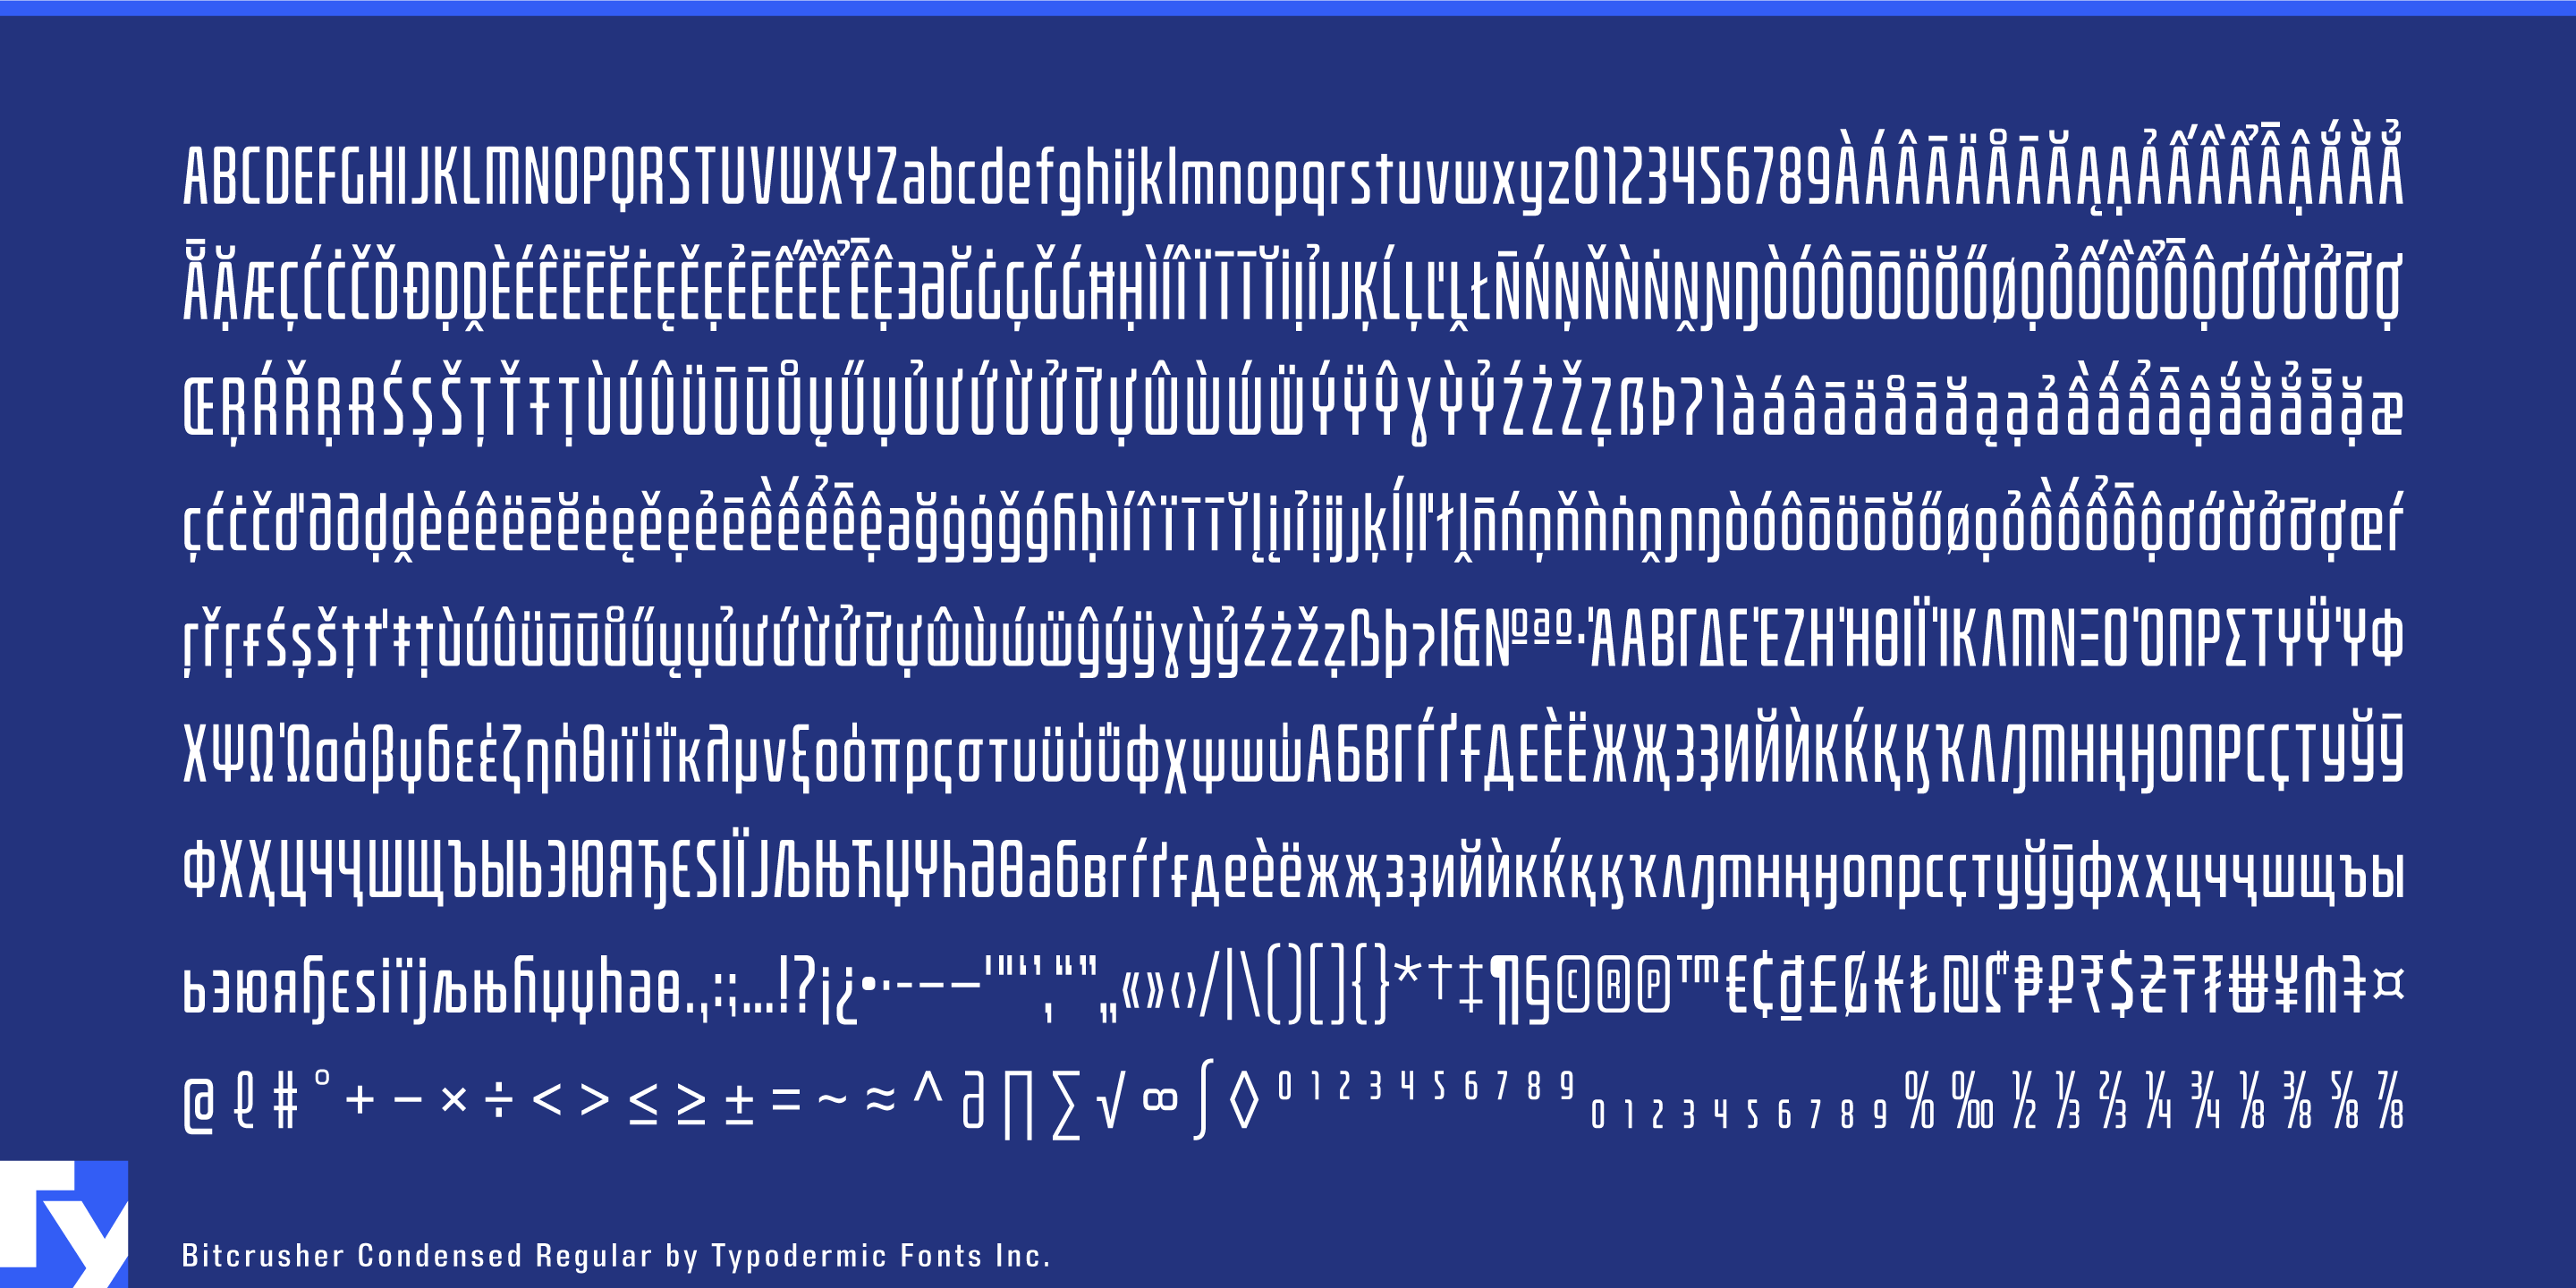 Bitcrusher Crushed Bold Font preview